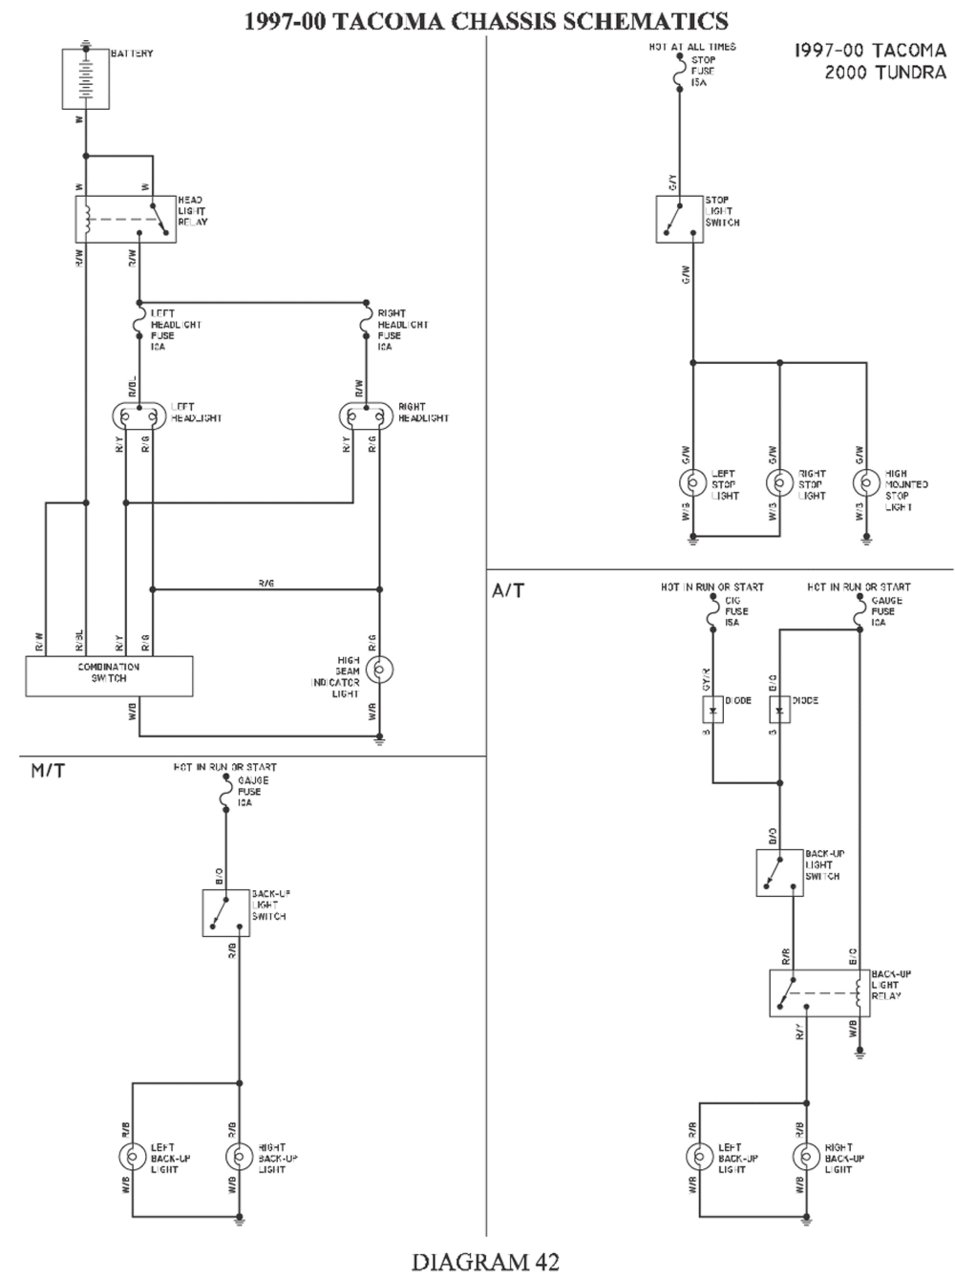 Toyota Tacoma Wiring Diagram from twstatic.net